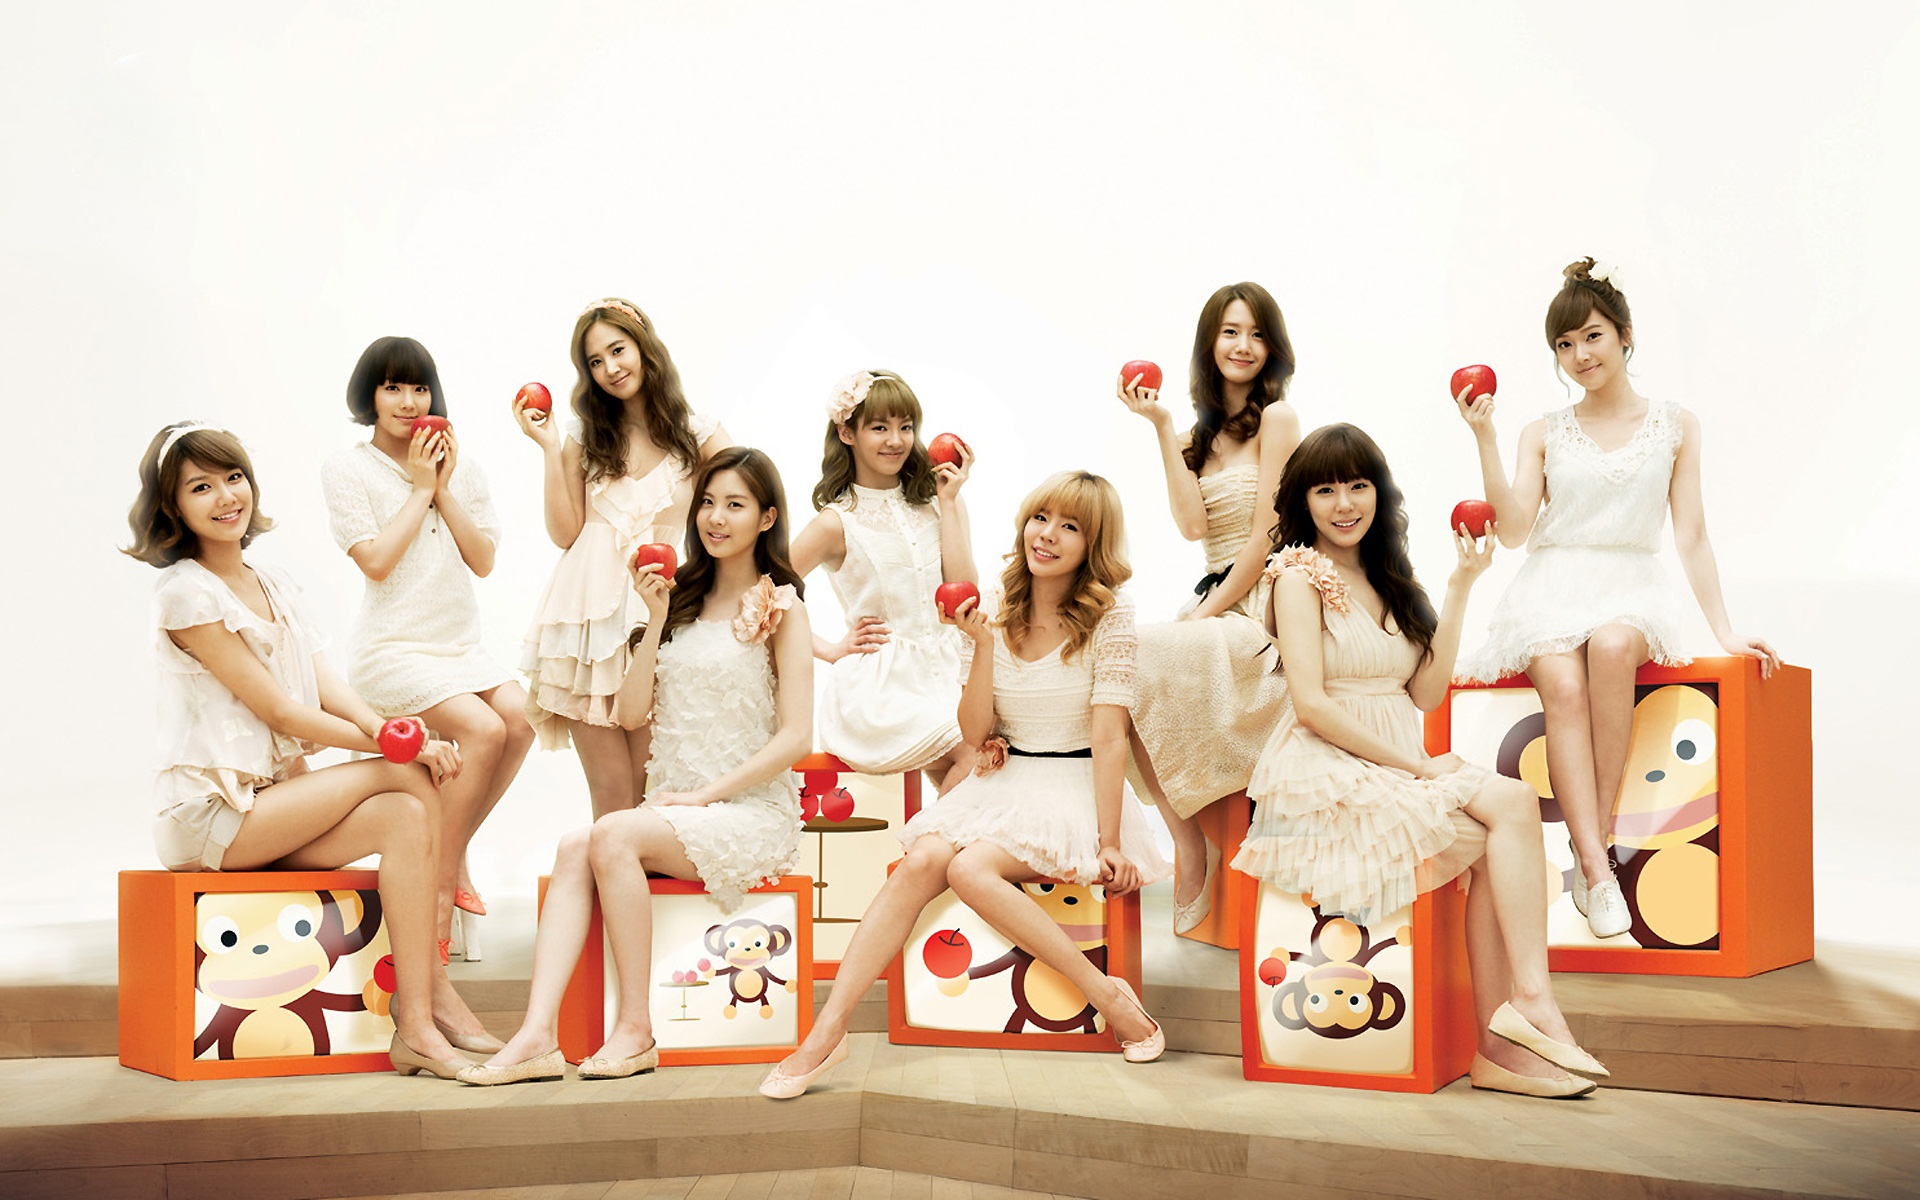 Girls Generation latest HD wallpapers collection #16 - 1920x1200